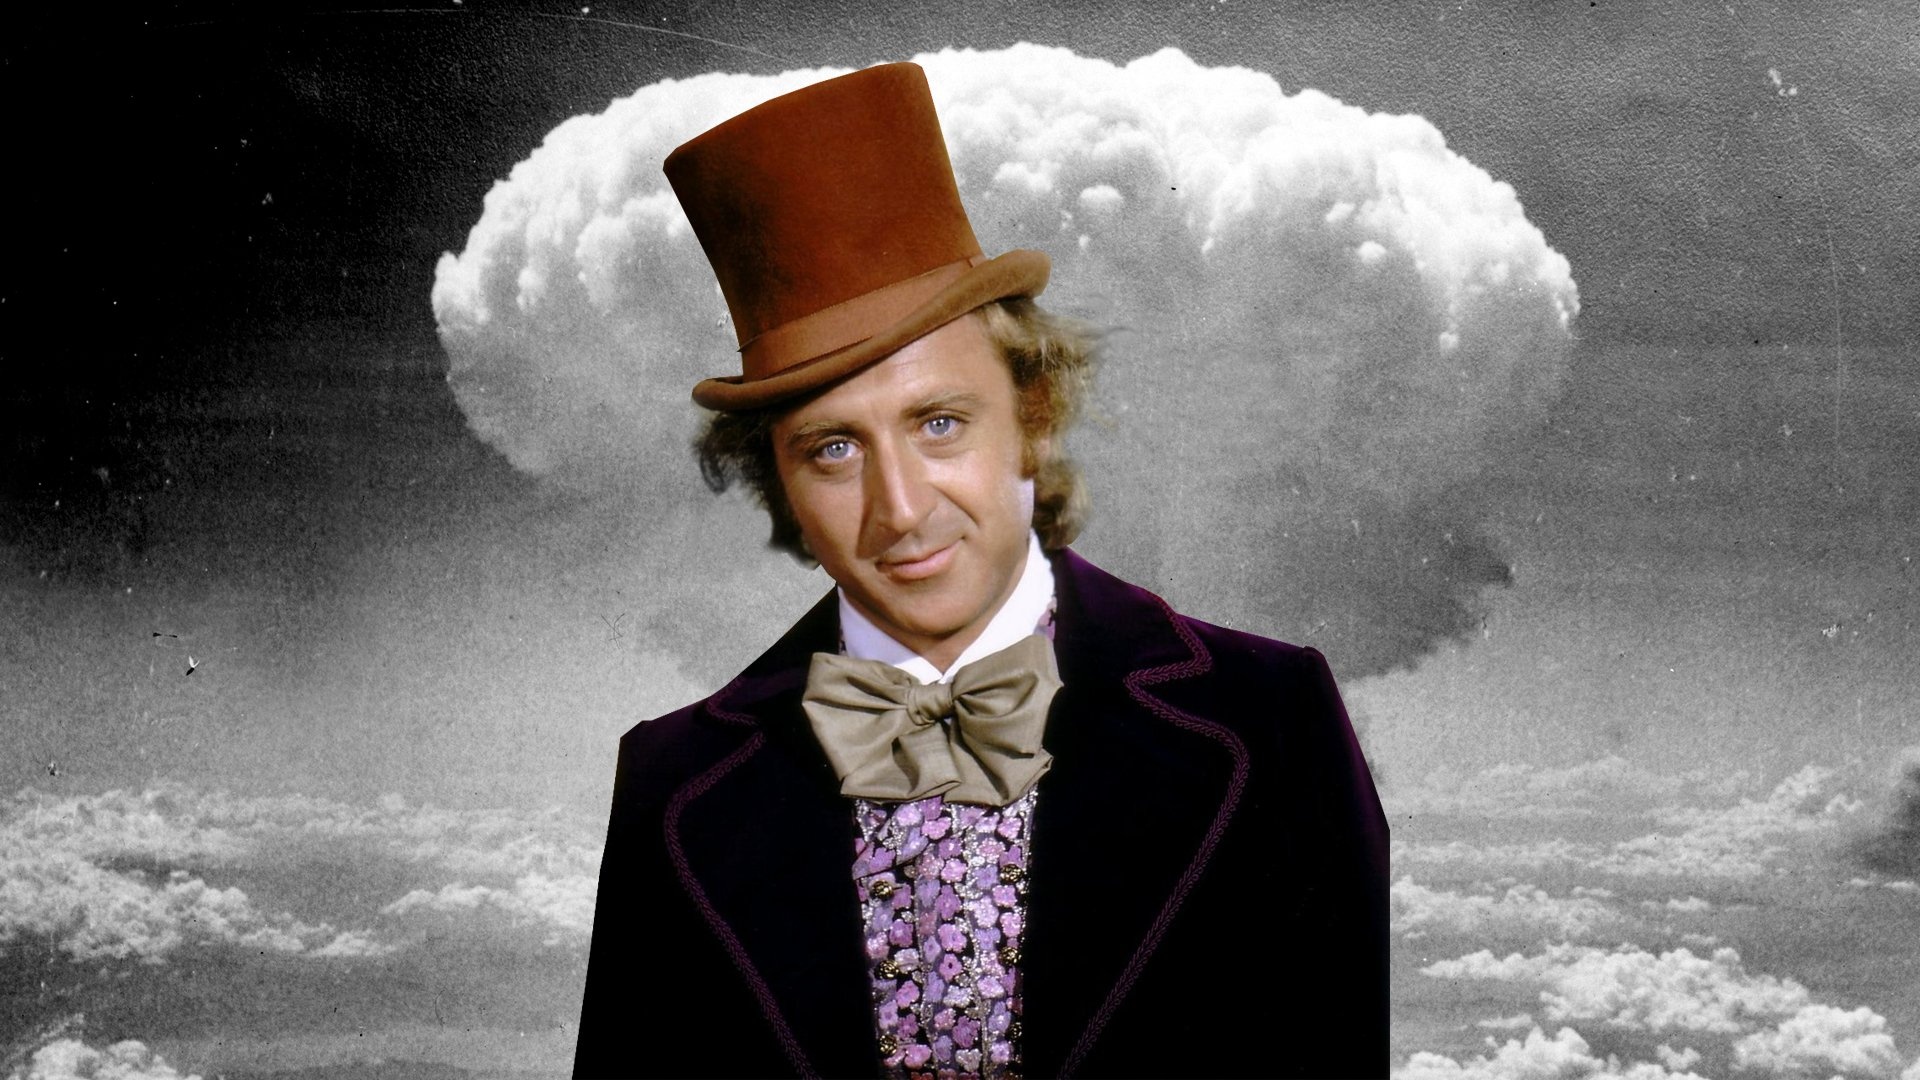 Willy Wonka, HD wallpapers, Background images, Chocolate factory, 1920x1080 Full HD Desktop